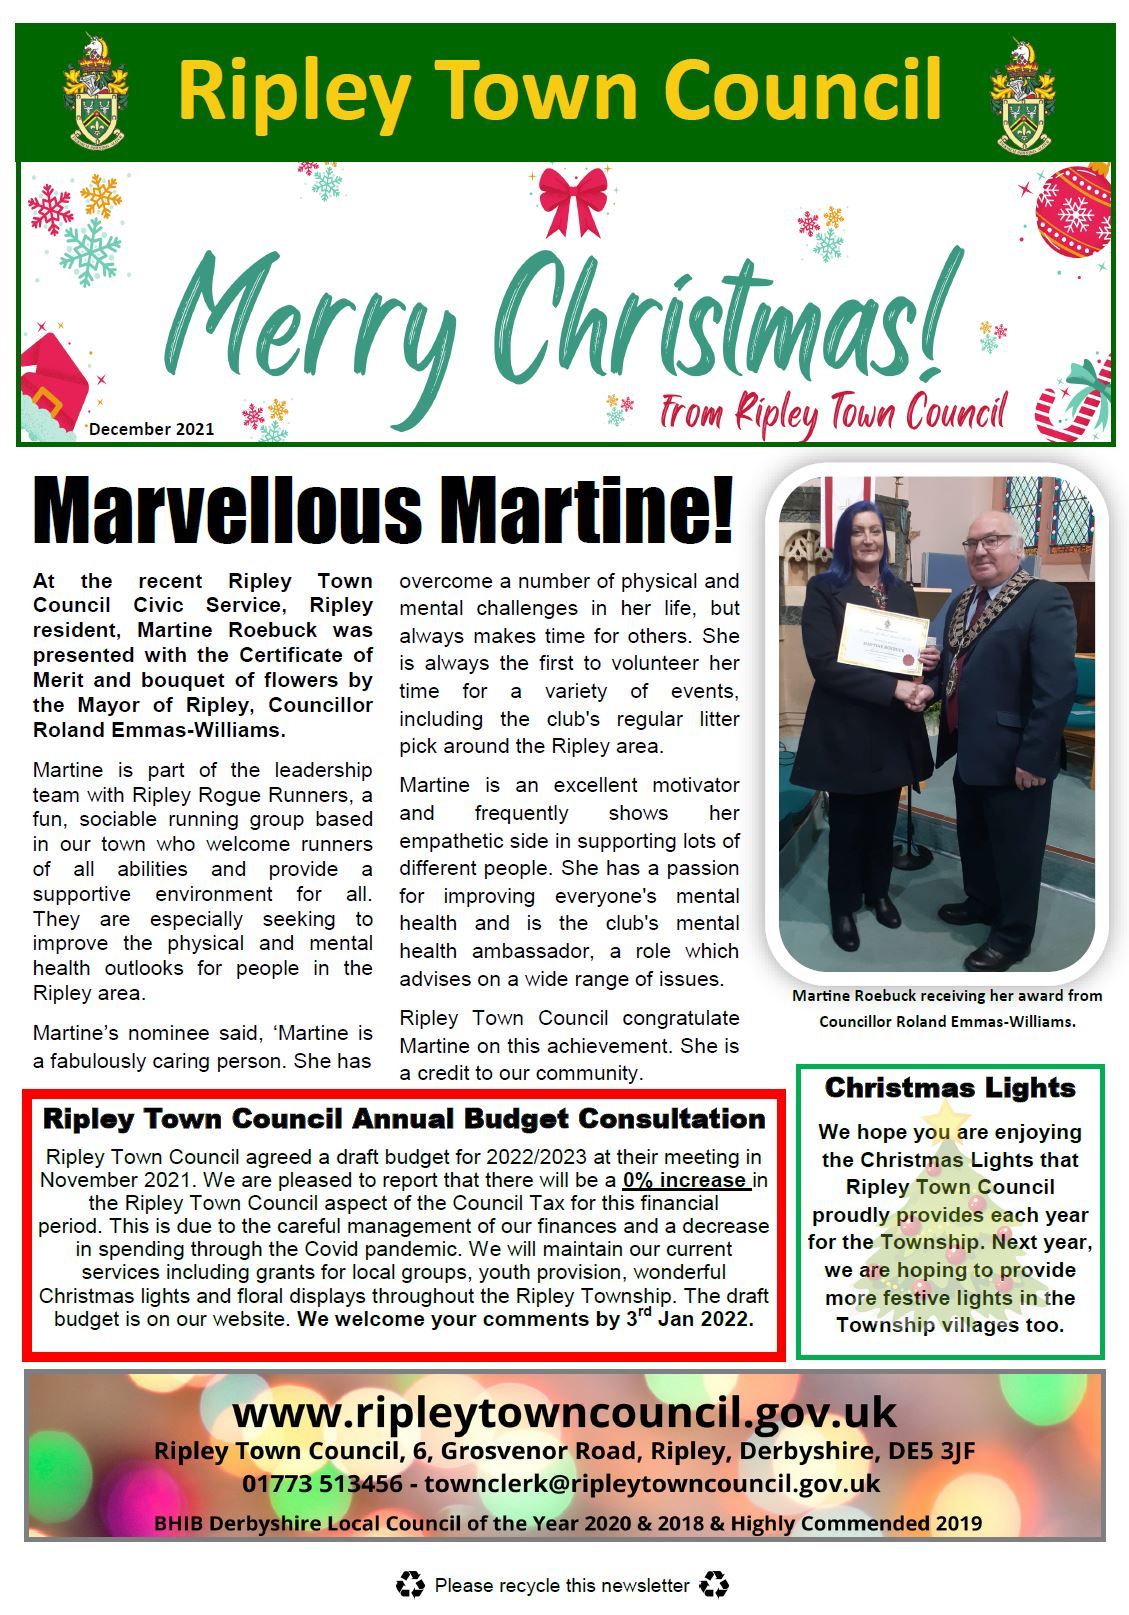 Ripley Town Council December newsletter Merry Christmas message, photo of Certificate of Merit winner and text